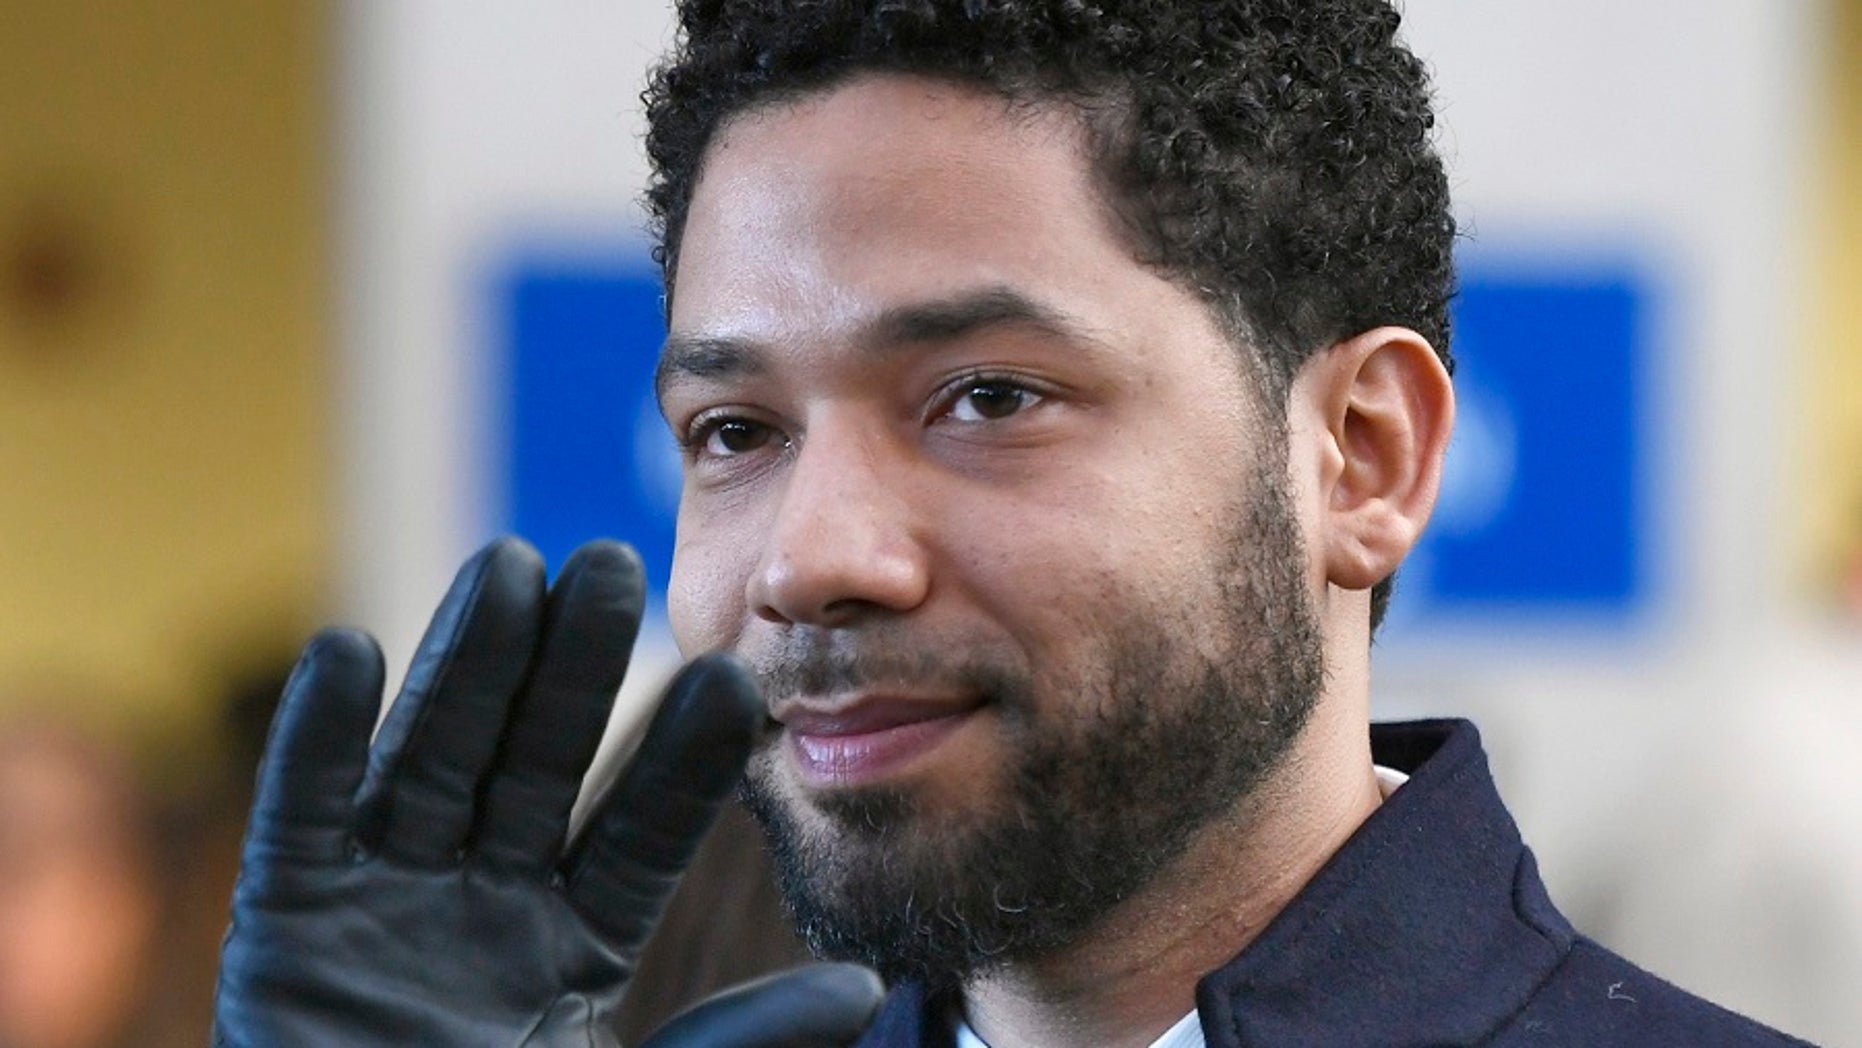 Actor Jussie Smollett smiles and waves to supporters before leaving Cook County (Ill.) Court after his charges were dropped in Chicago. (Associated Press)